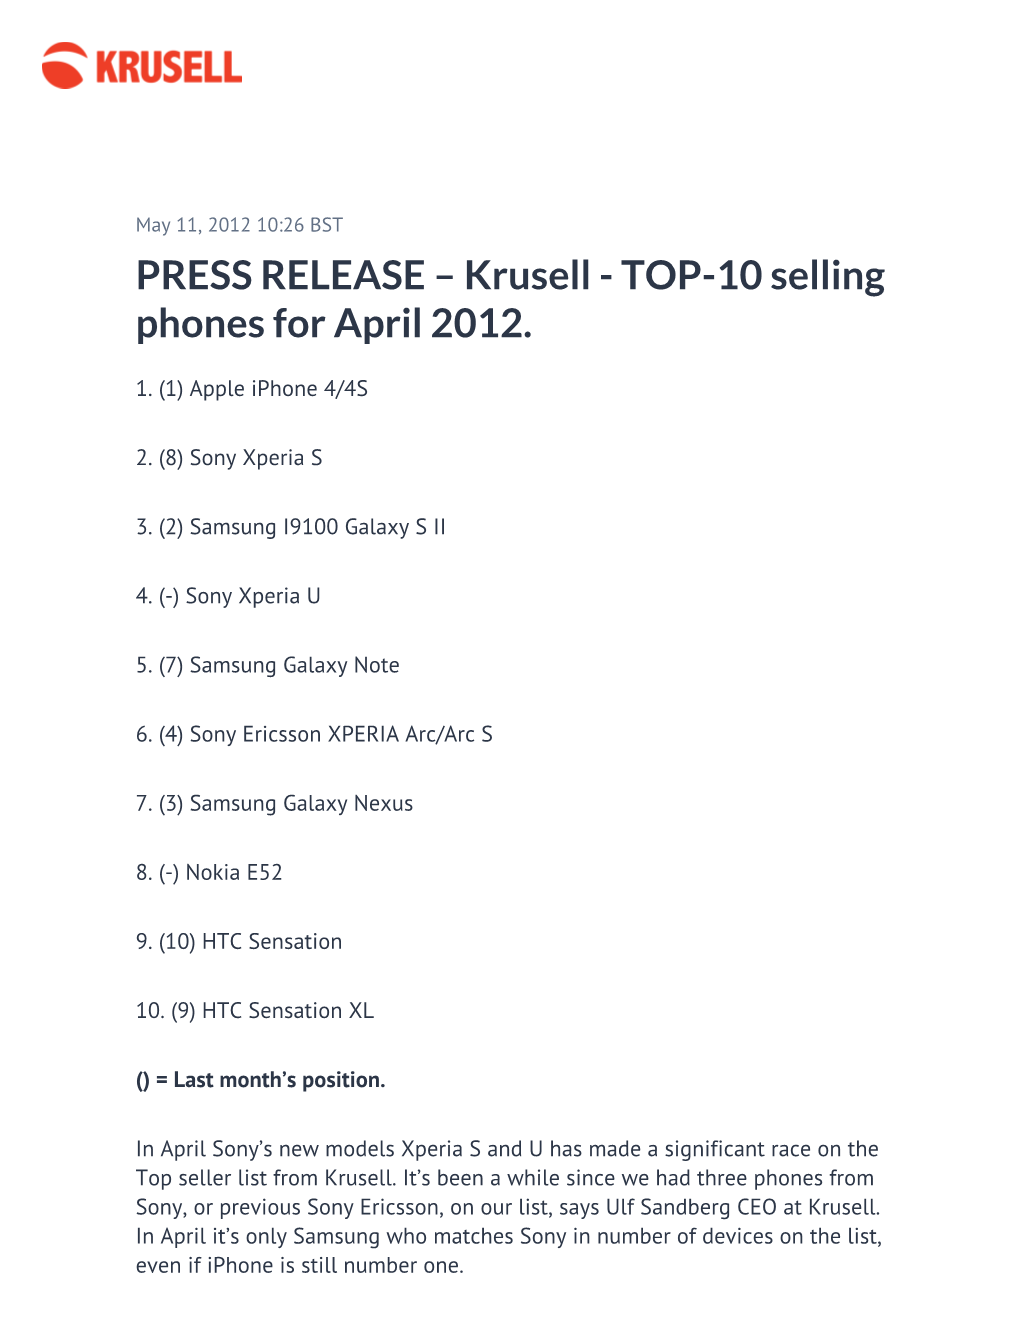 PRESS RELEASE – Krusell - TOP-10 Selling Phones for April 2012